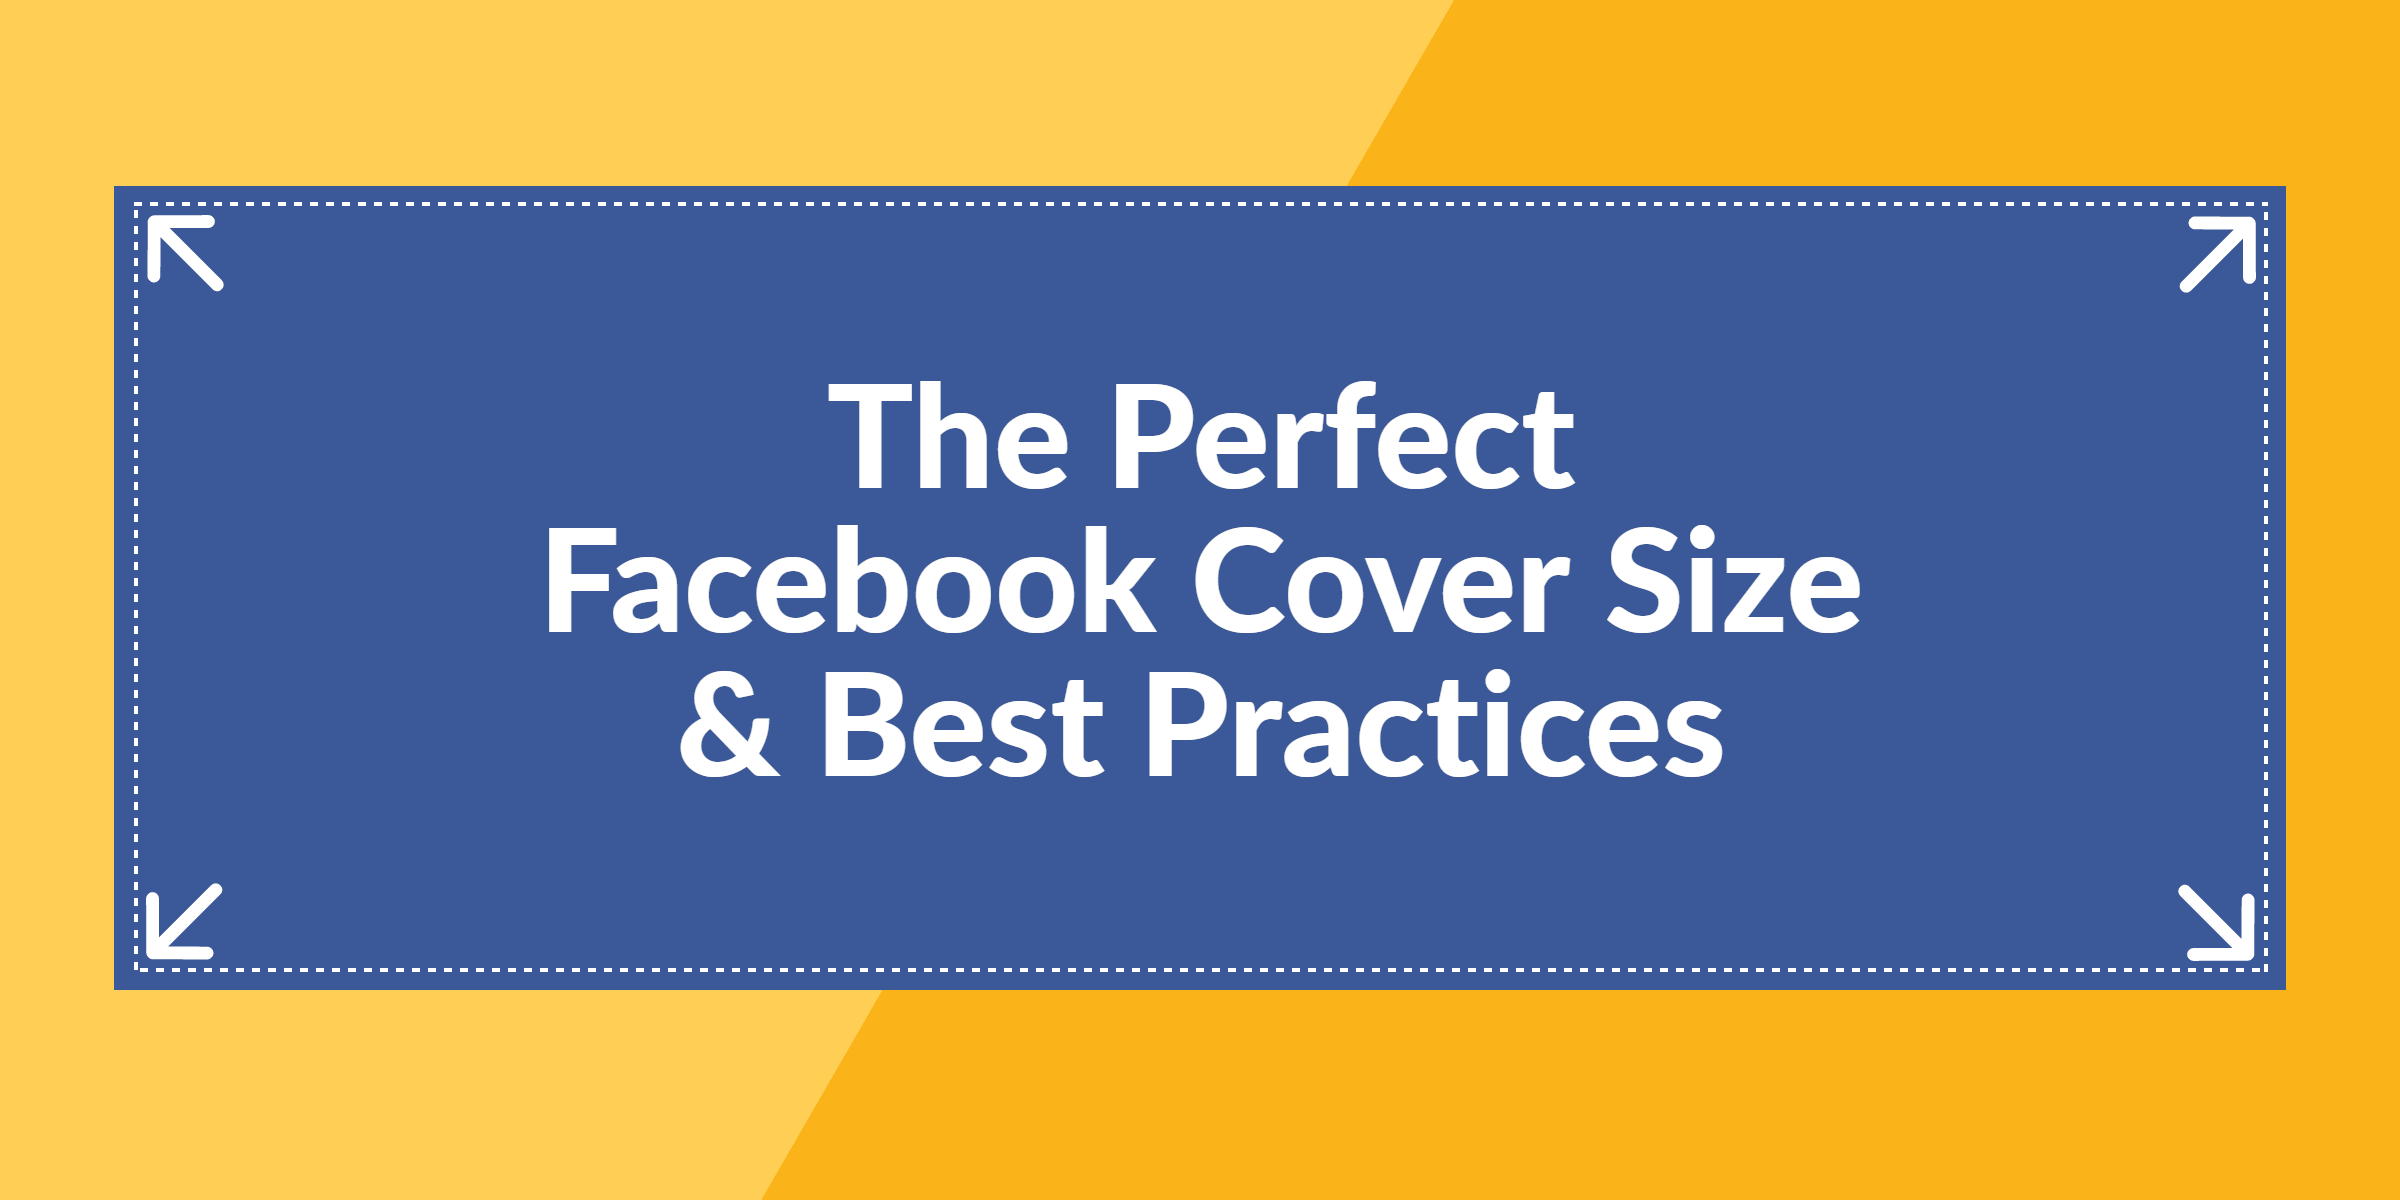 The Perfect Facebook Cover Photo Size & Best Practices